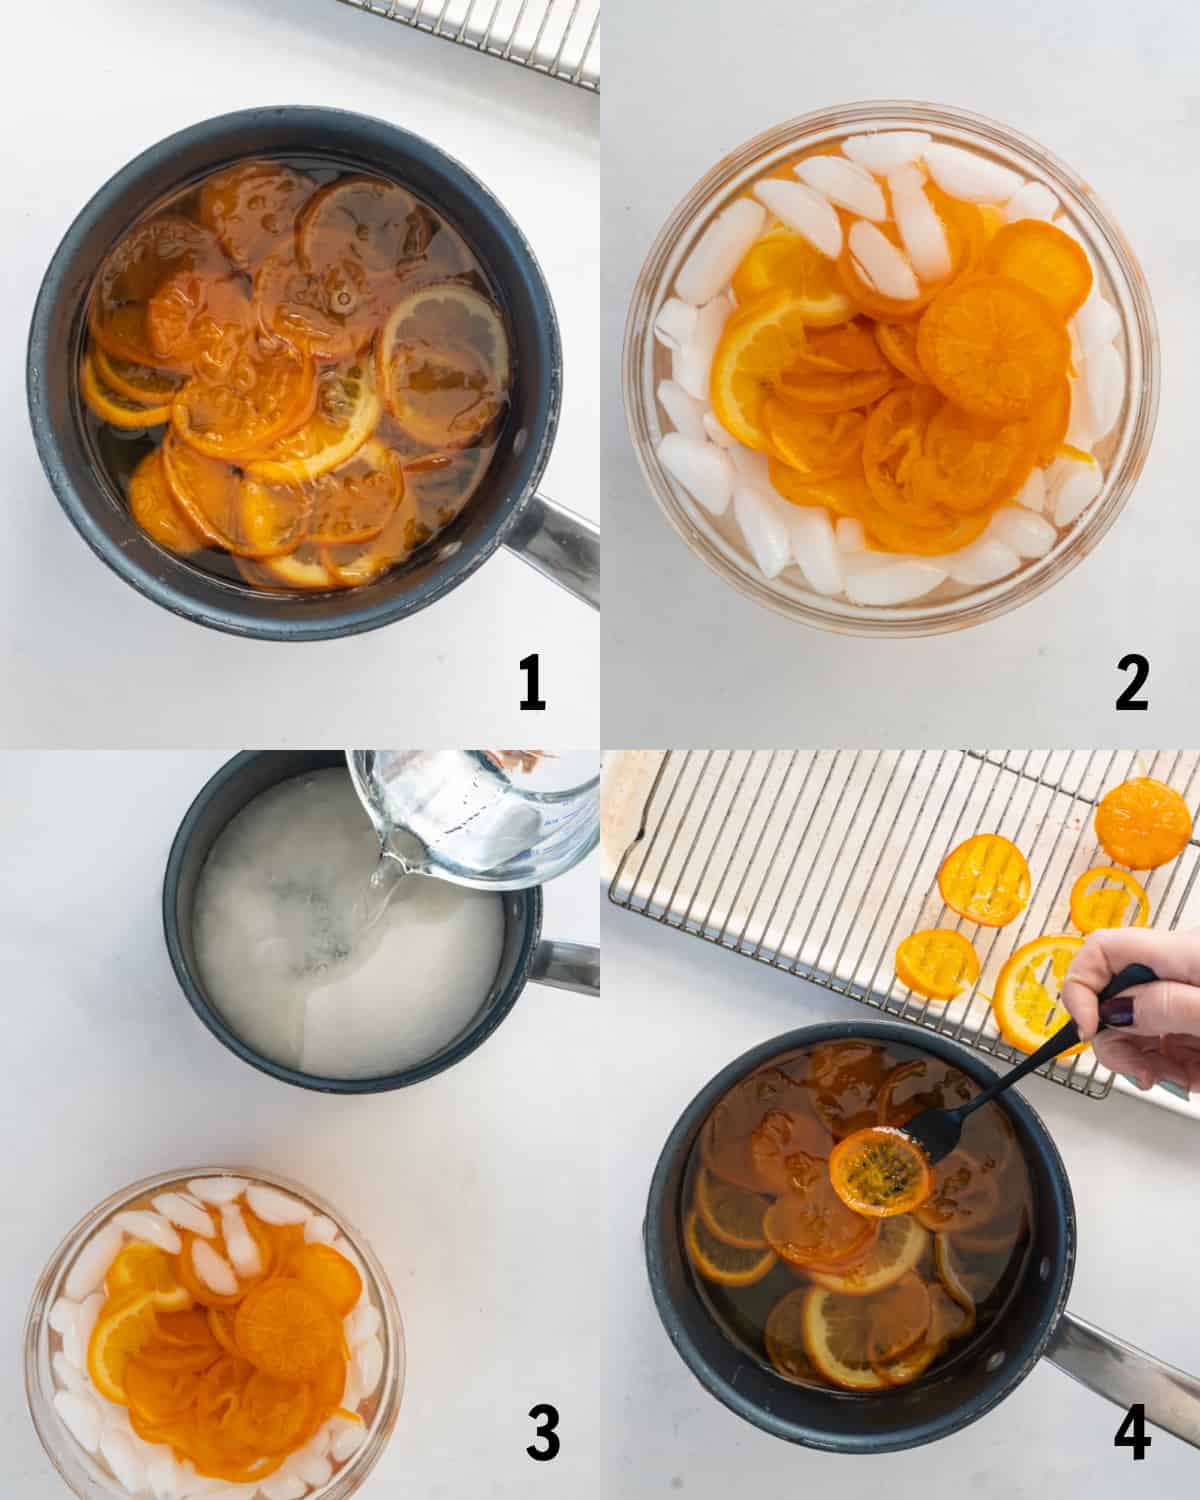 Heating the orange slices in a pan with sugar and water before setting them on a drying rack to cool and dry.